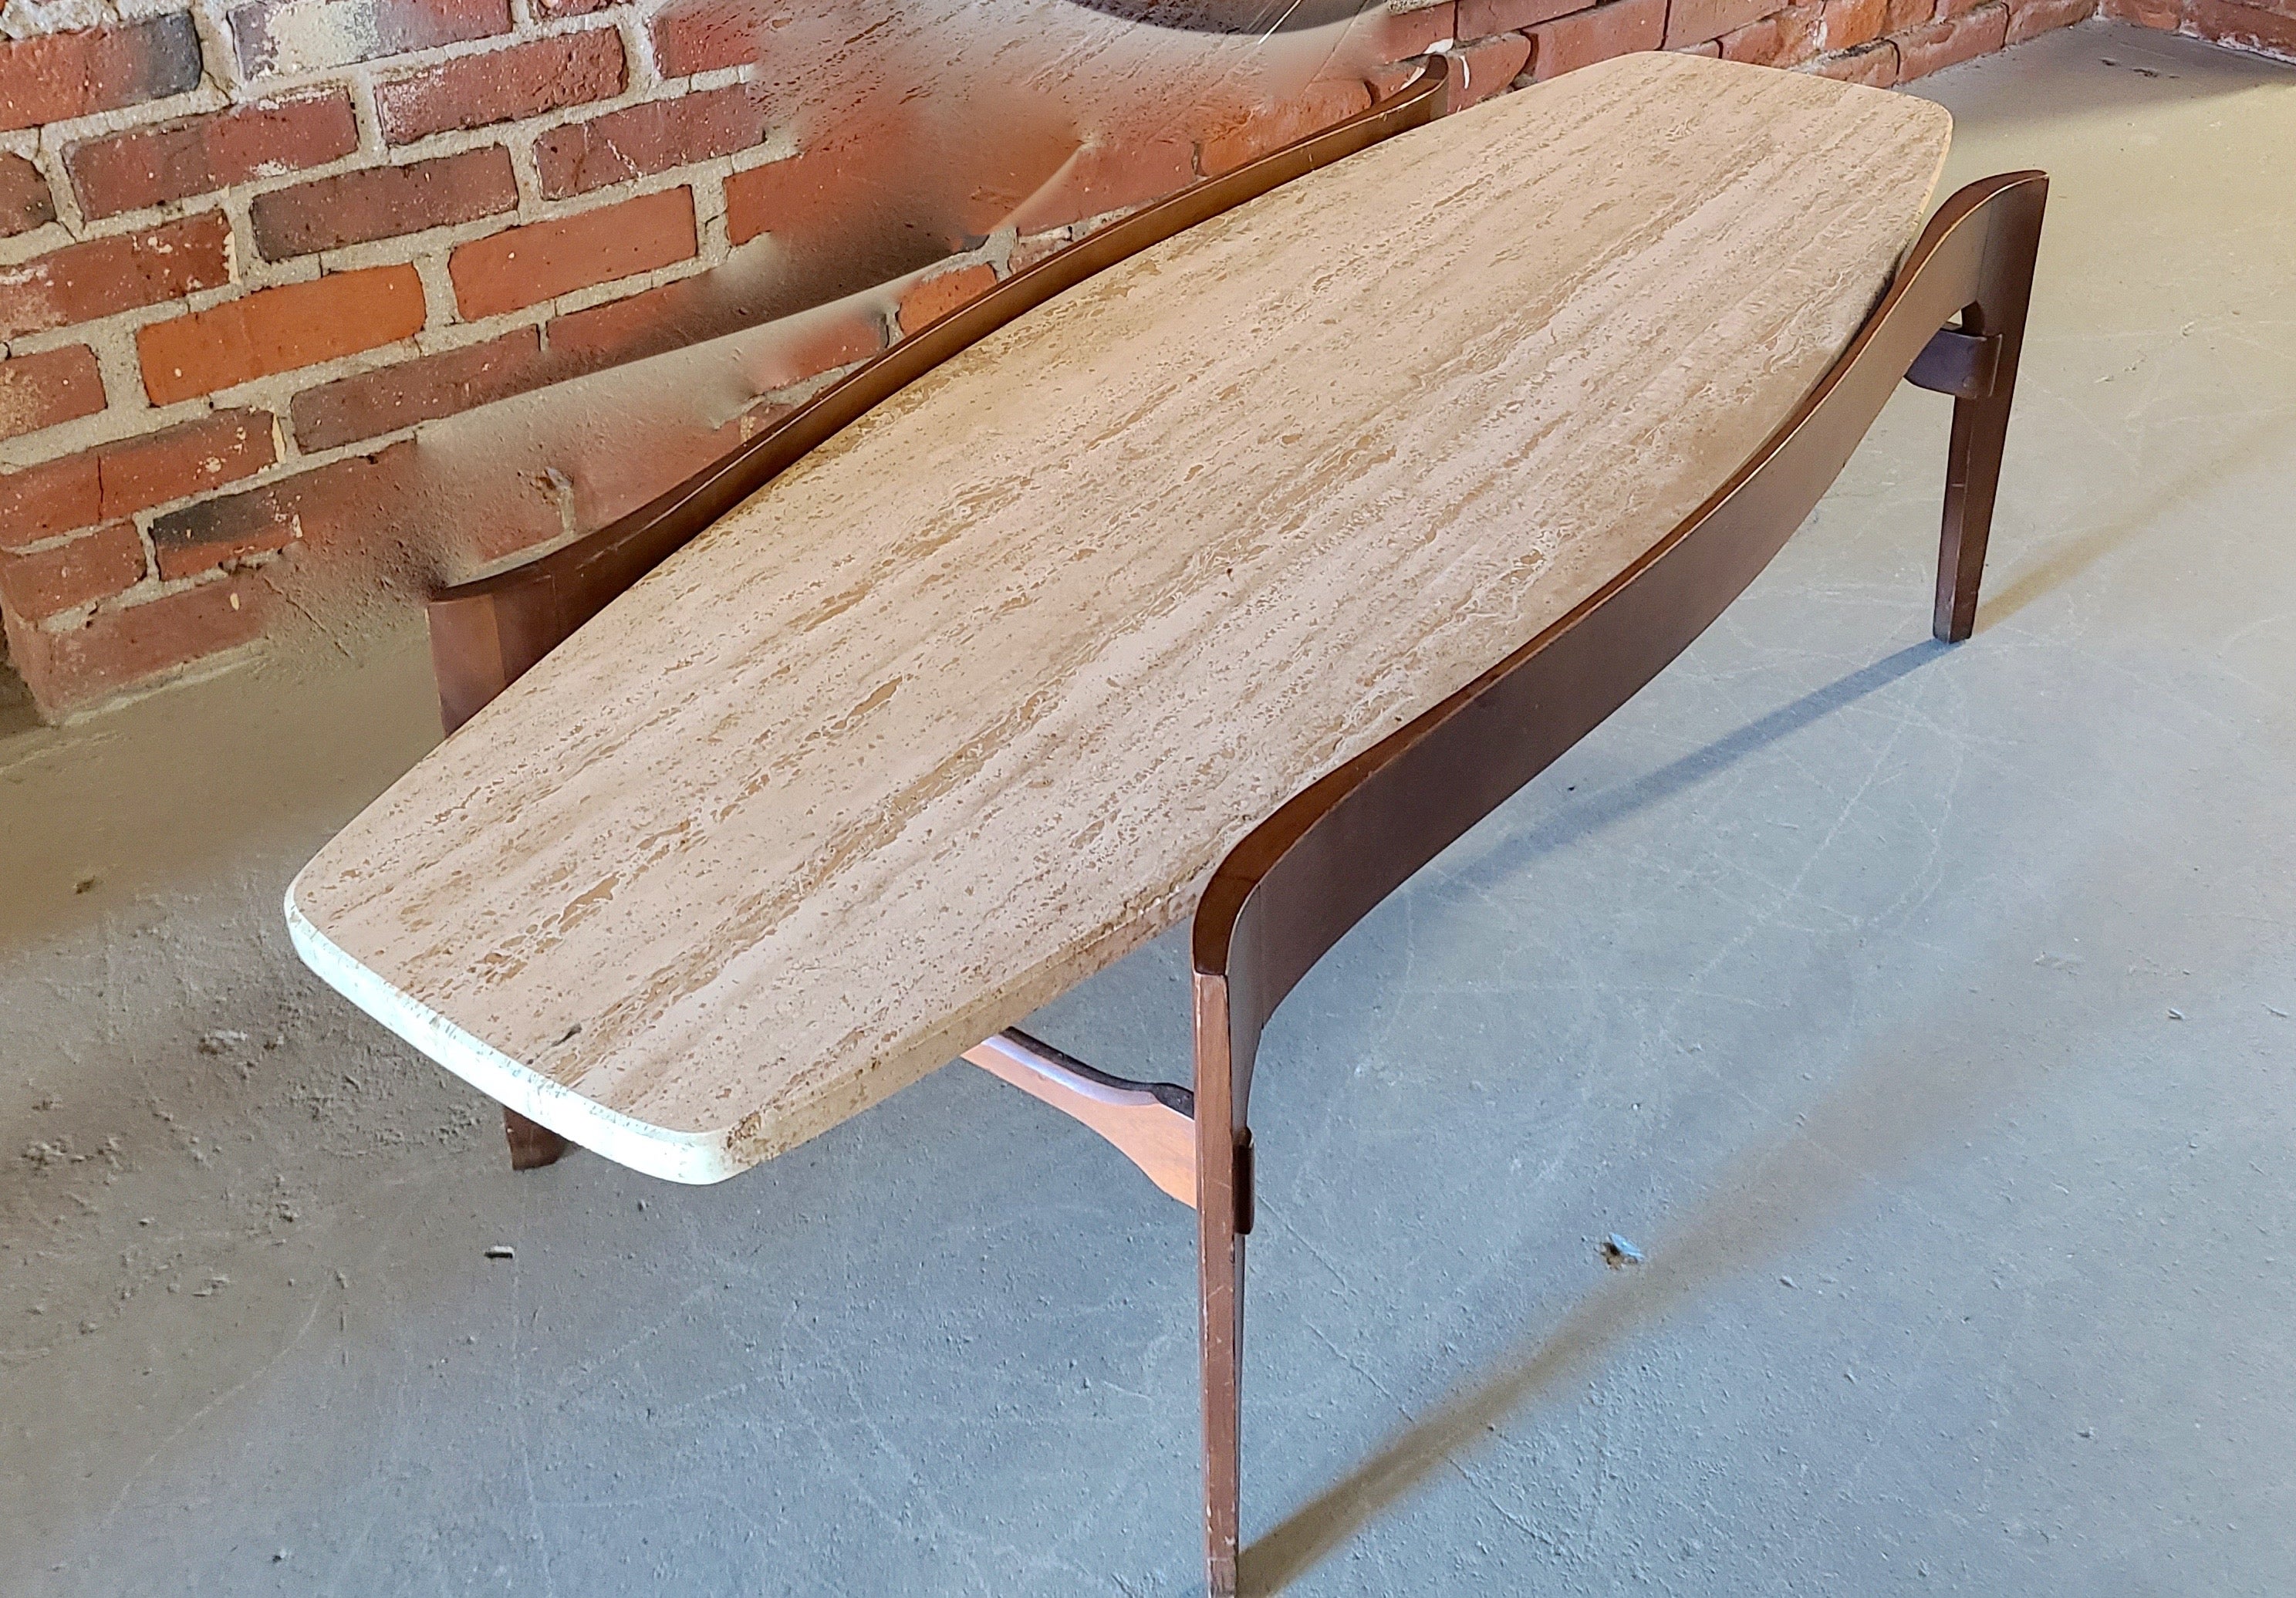 Walnut and travertine coffee table. Sculpted walnut cradle for Travertine Surfboard top.